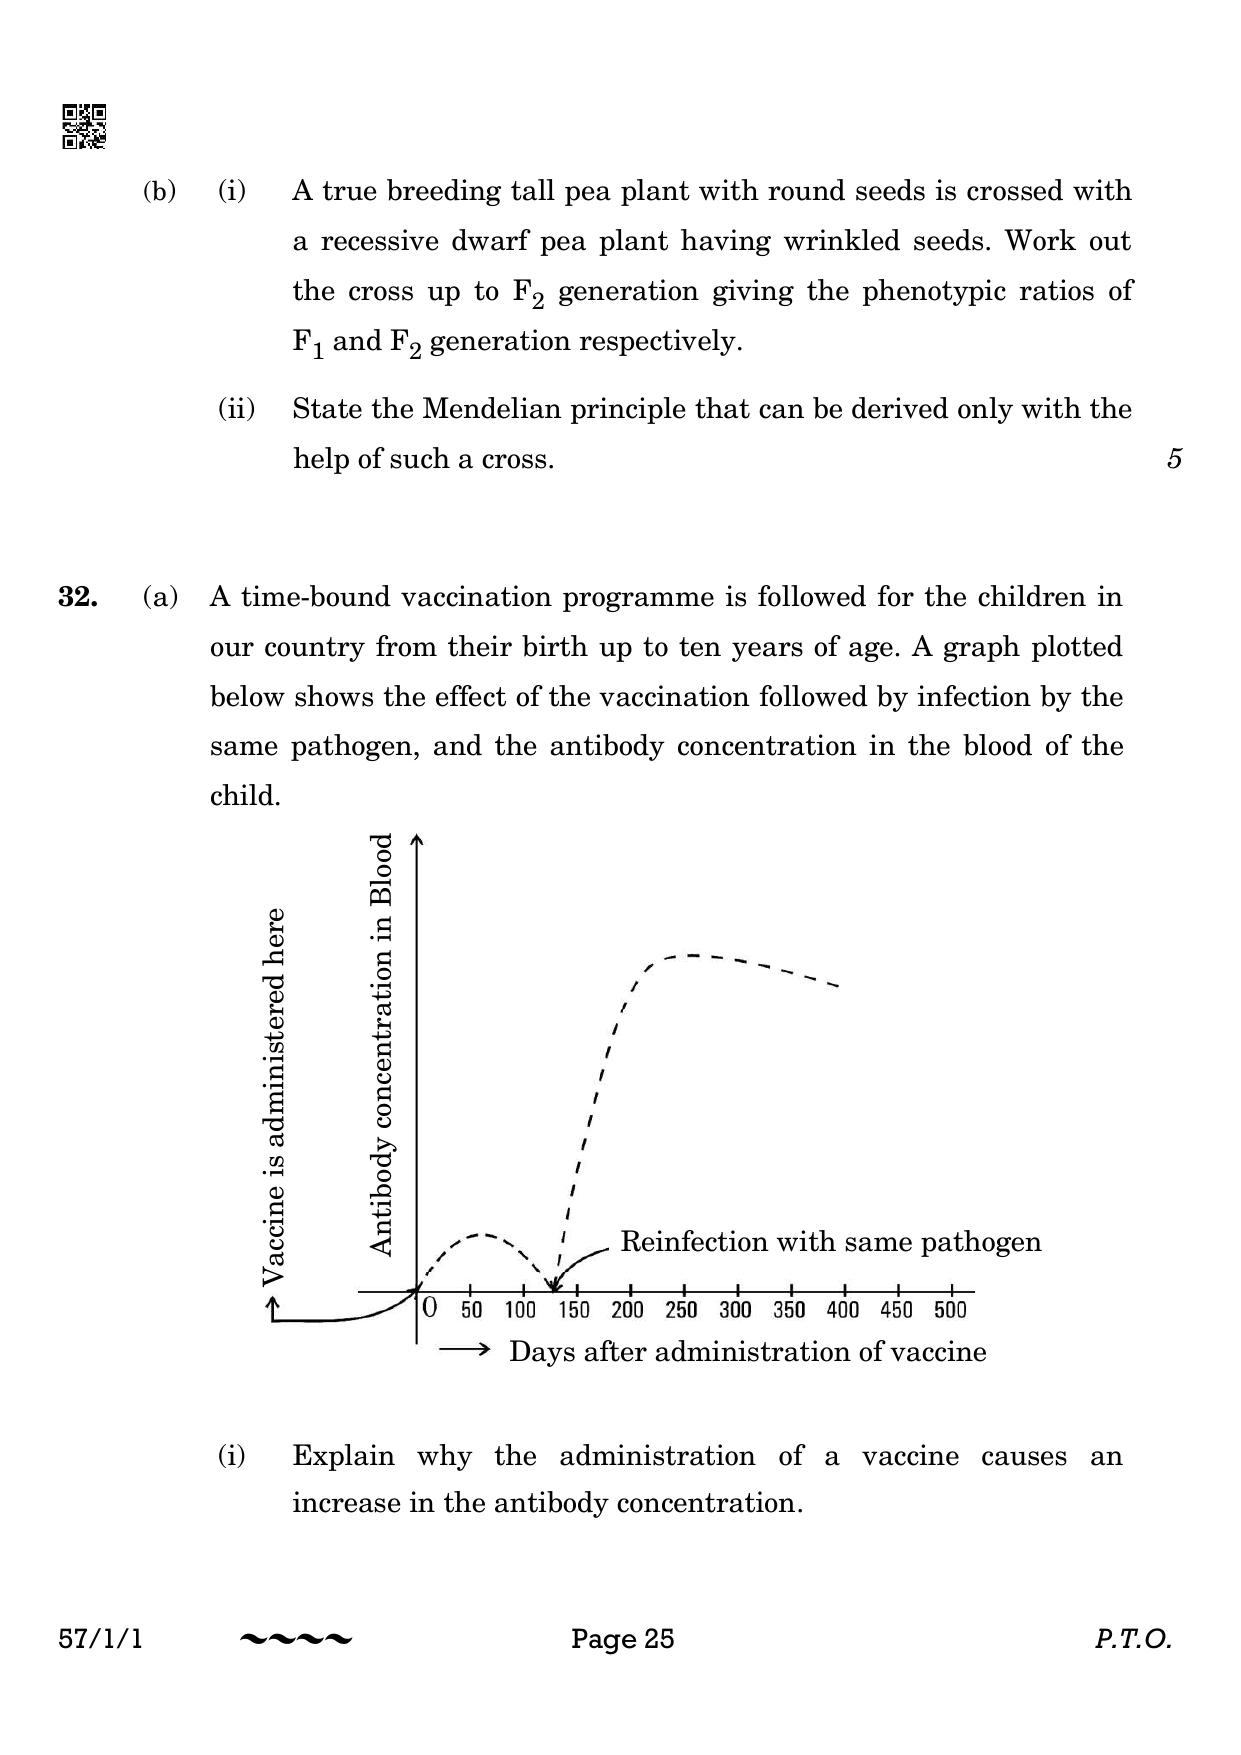 CBSE Class 12 57-1-1 Biology 2023 Question Paper - Page 25